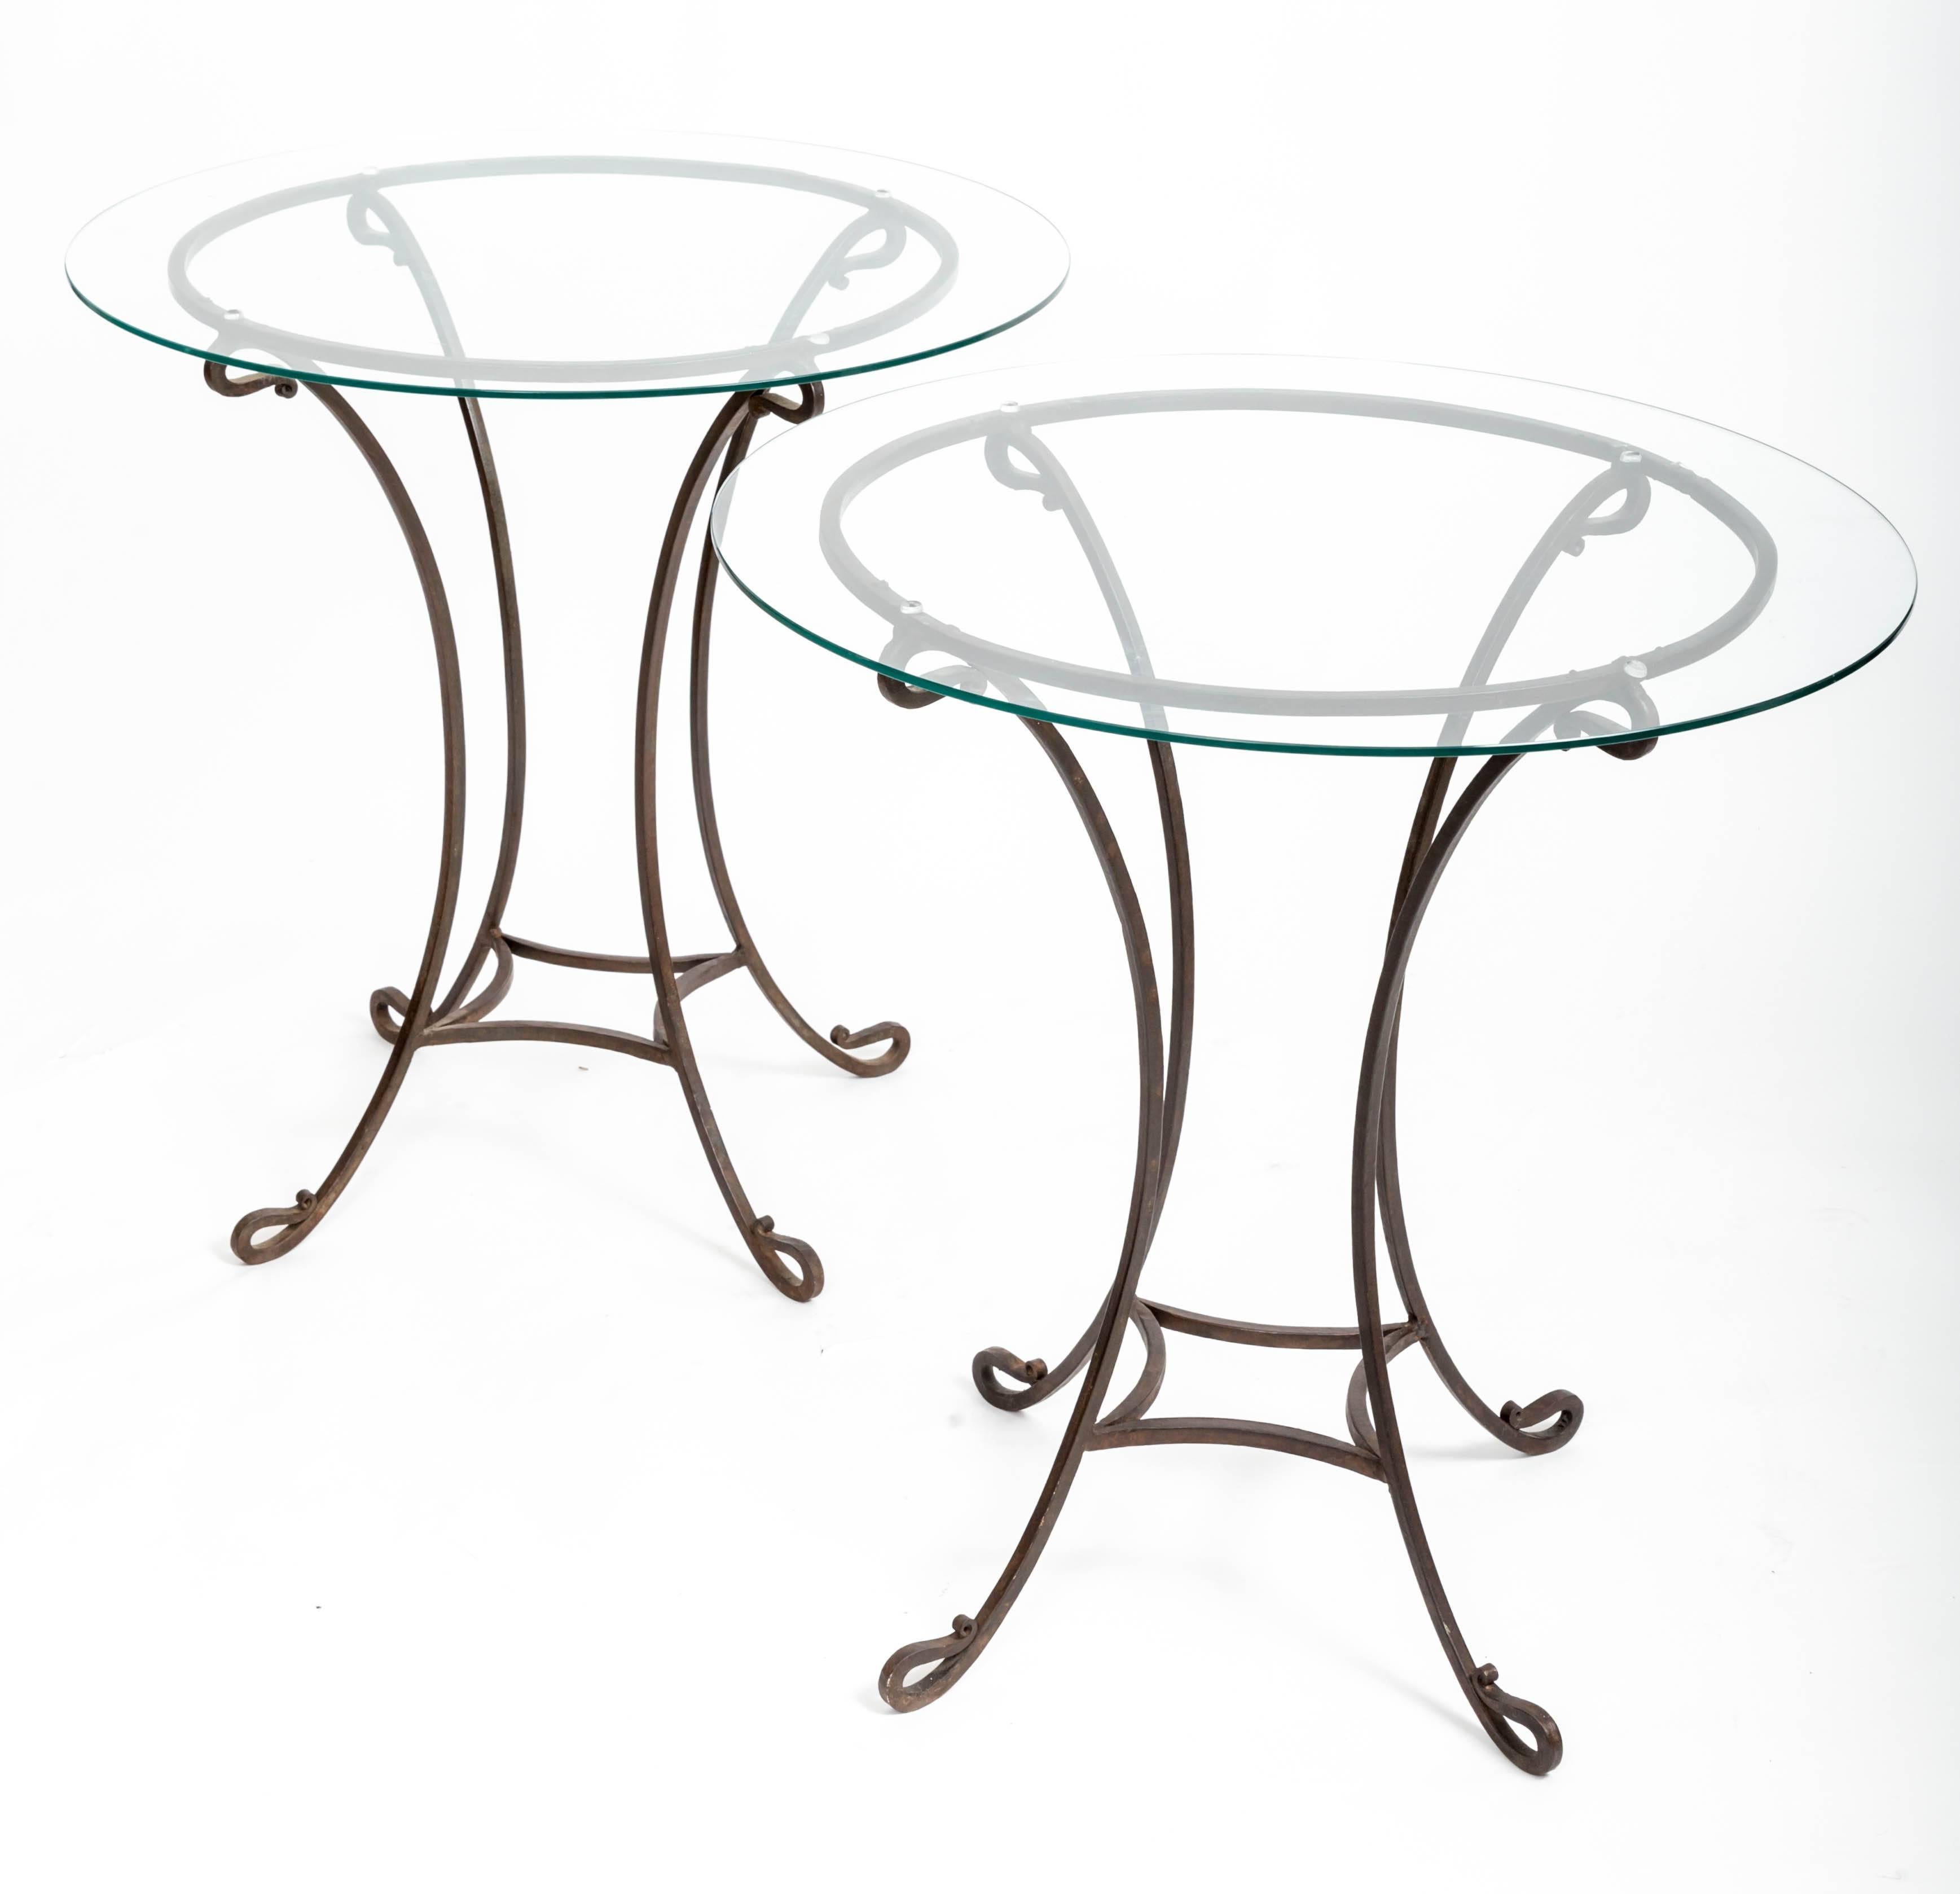 Pair of hand forged iron bases with scrolled feet and glass tops. Great as bedside tables. Can easily support two larger glass tops if desired. Measure: 30-32